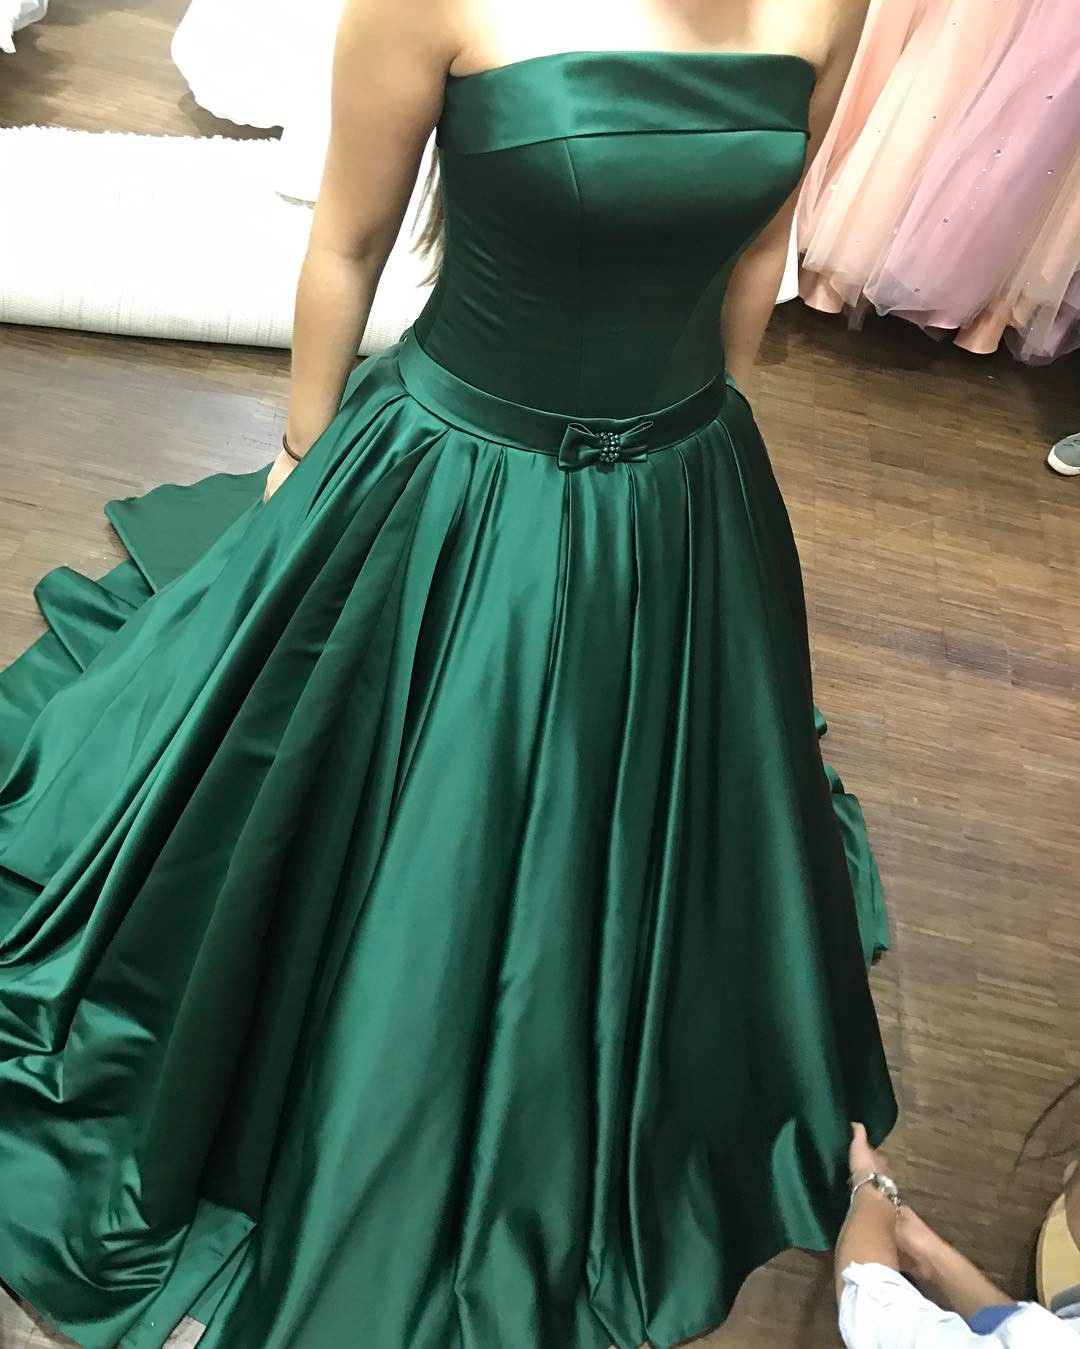 Gorgeous Strapless Long Green Prom Dress With Bow Sash,strapless Pleated Evening Dress M2007